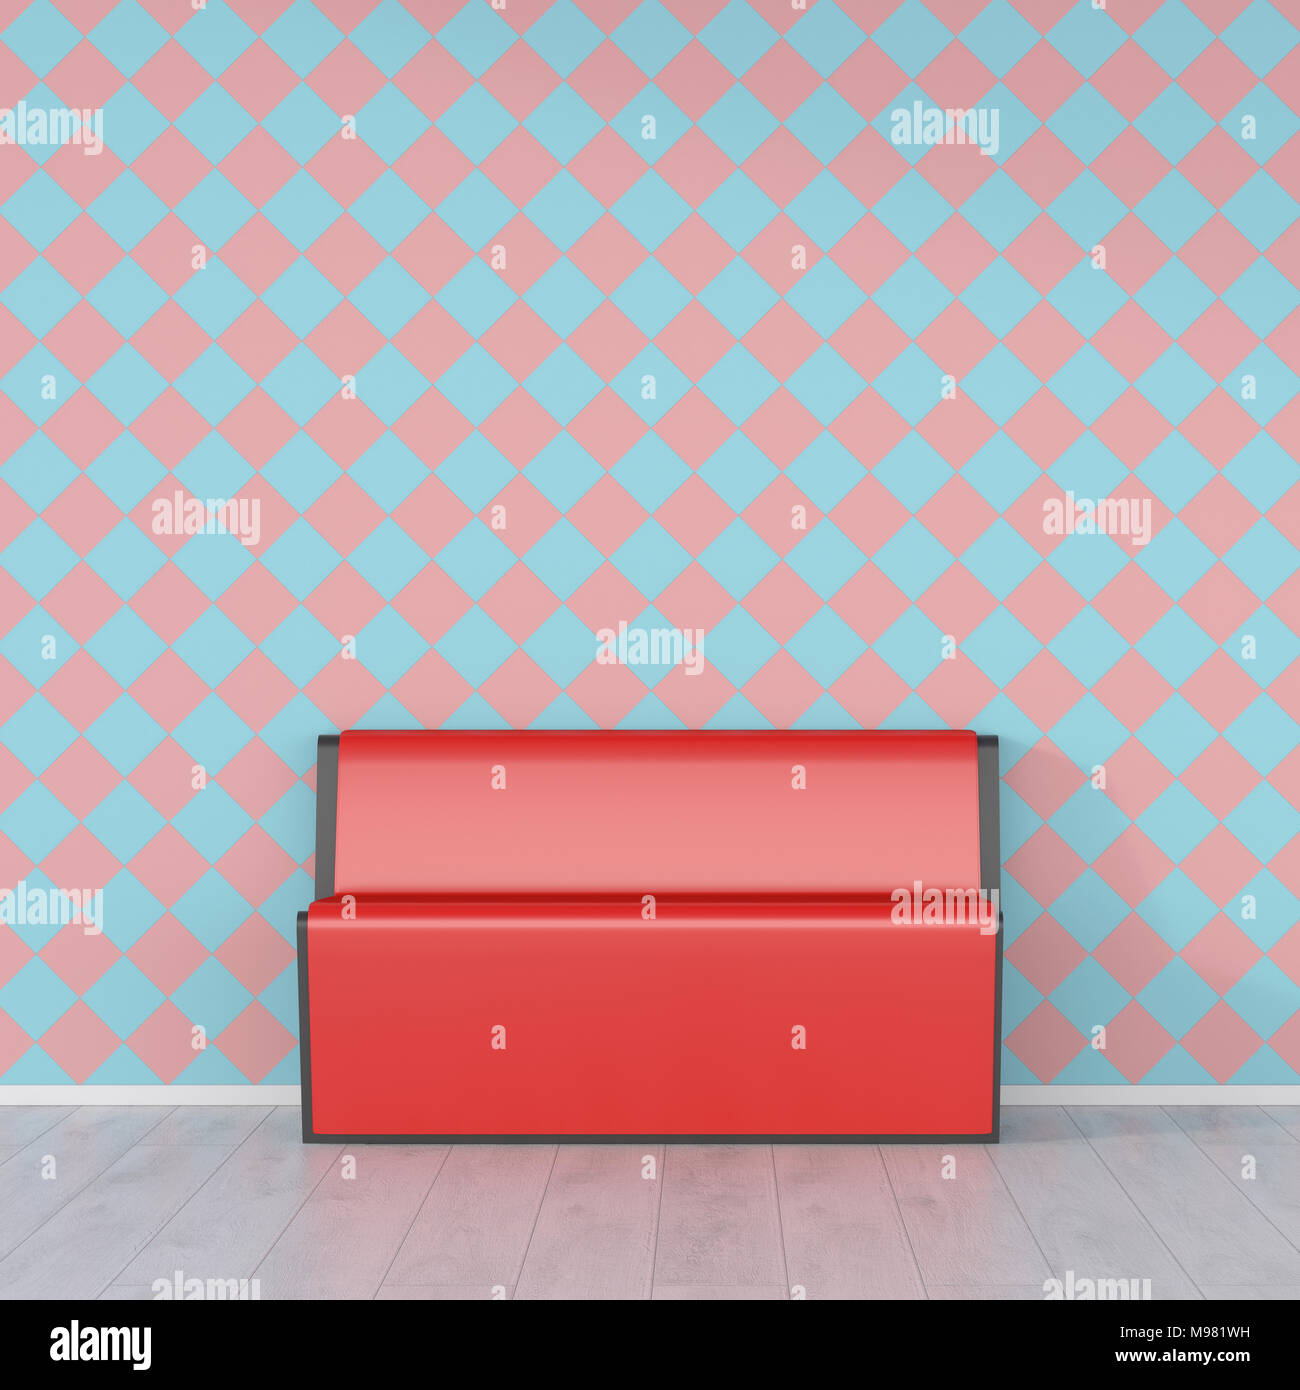 Red bench in front of checkered pattern wallpaper, 3d rendering Stock Photo